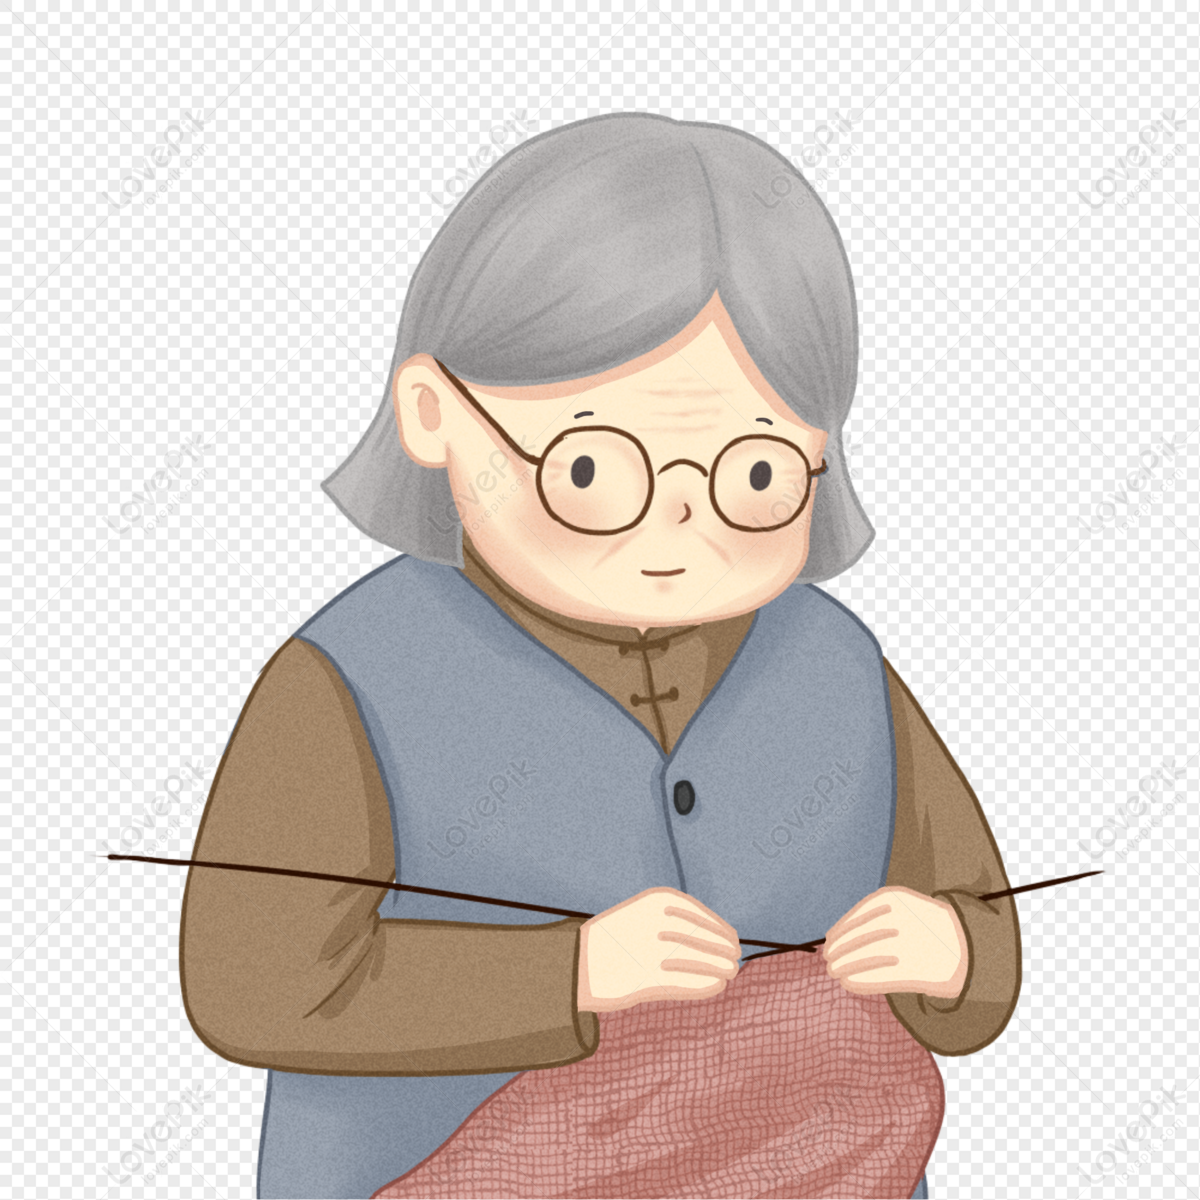 Old Mother Knitting A Sweater PNG Transparent Background And Clipart Image  For Free Download - Lovepik | 401205190